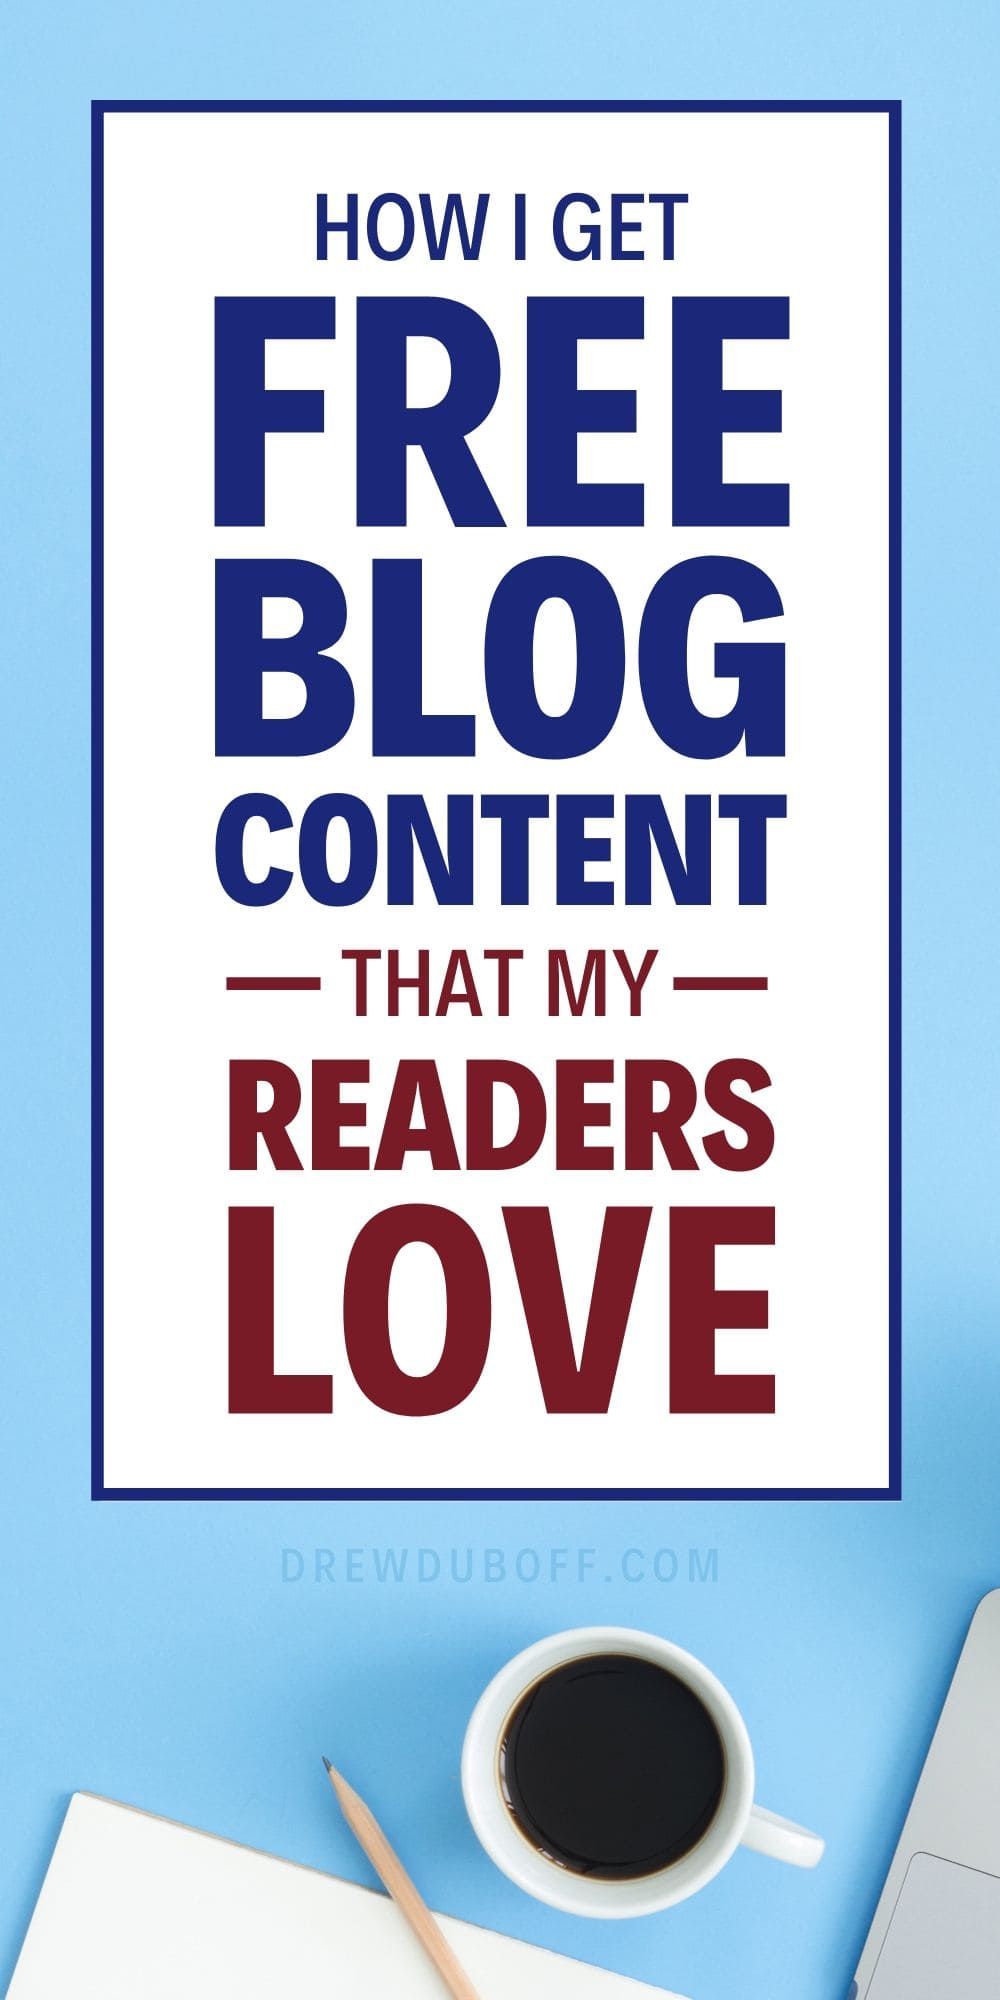 How I Get Free Blog Content That My Readers Love